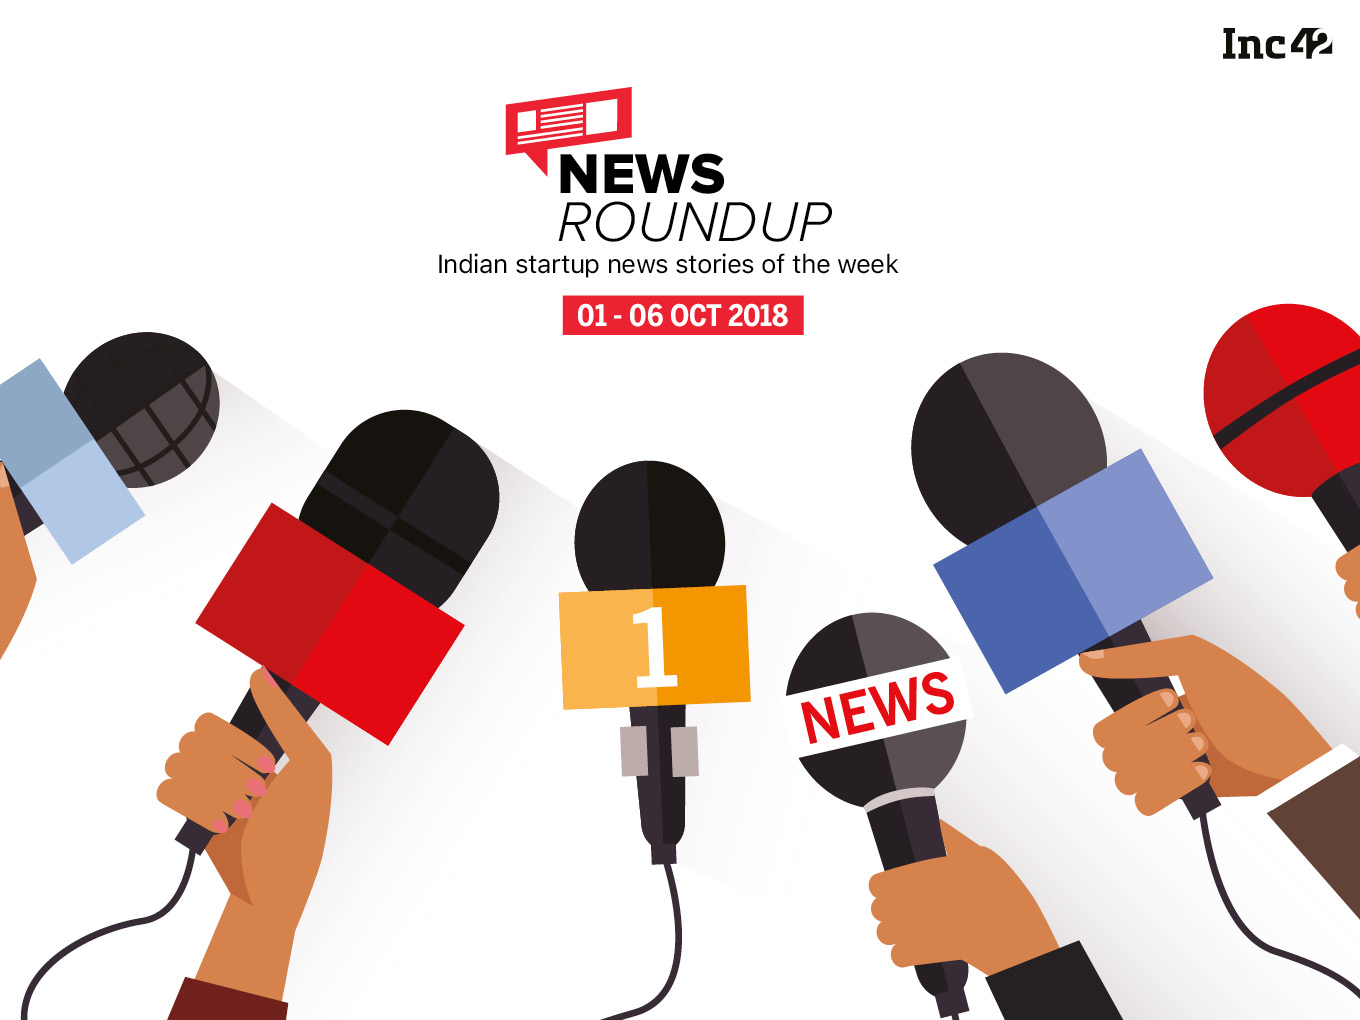 News Roundup: 11 Indian Startup News Stories That You Don’t Want To Miss This Week [1-6 October]